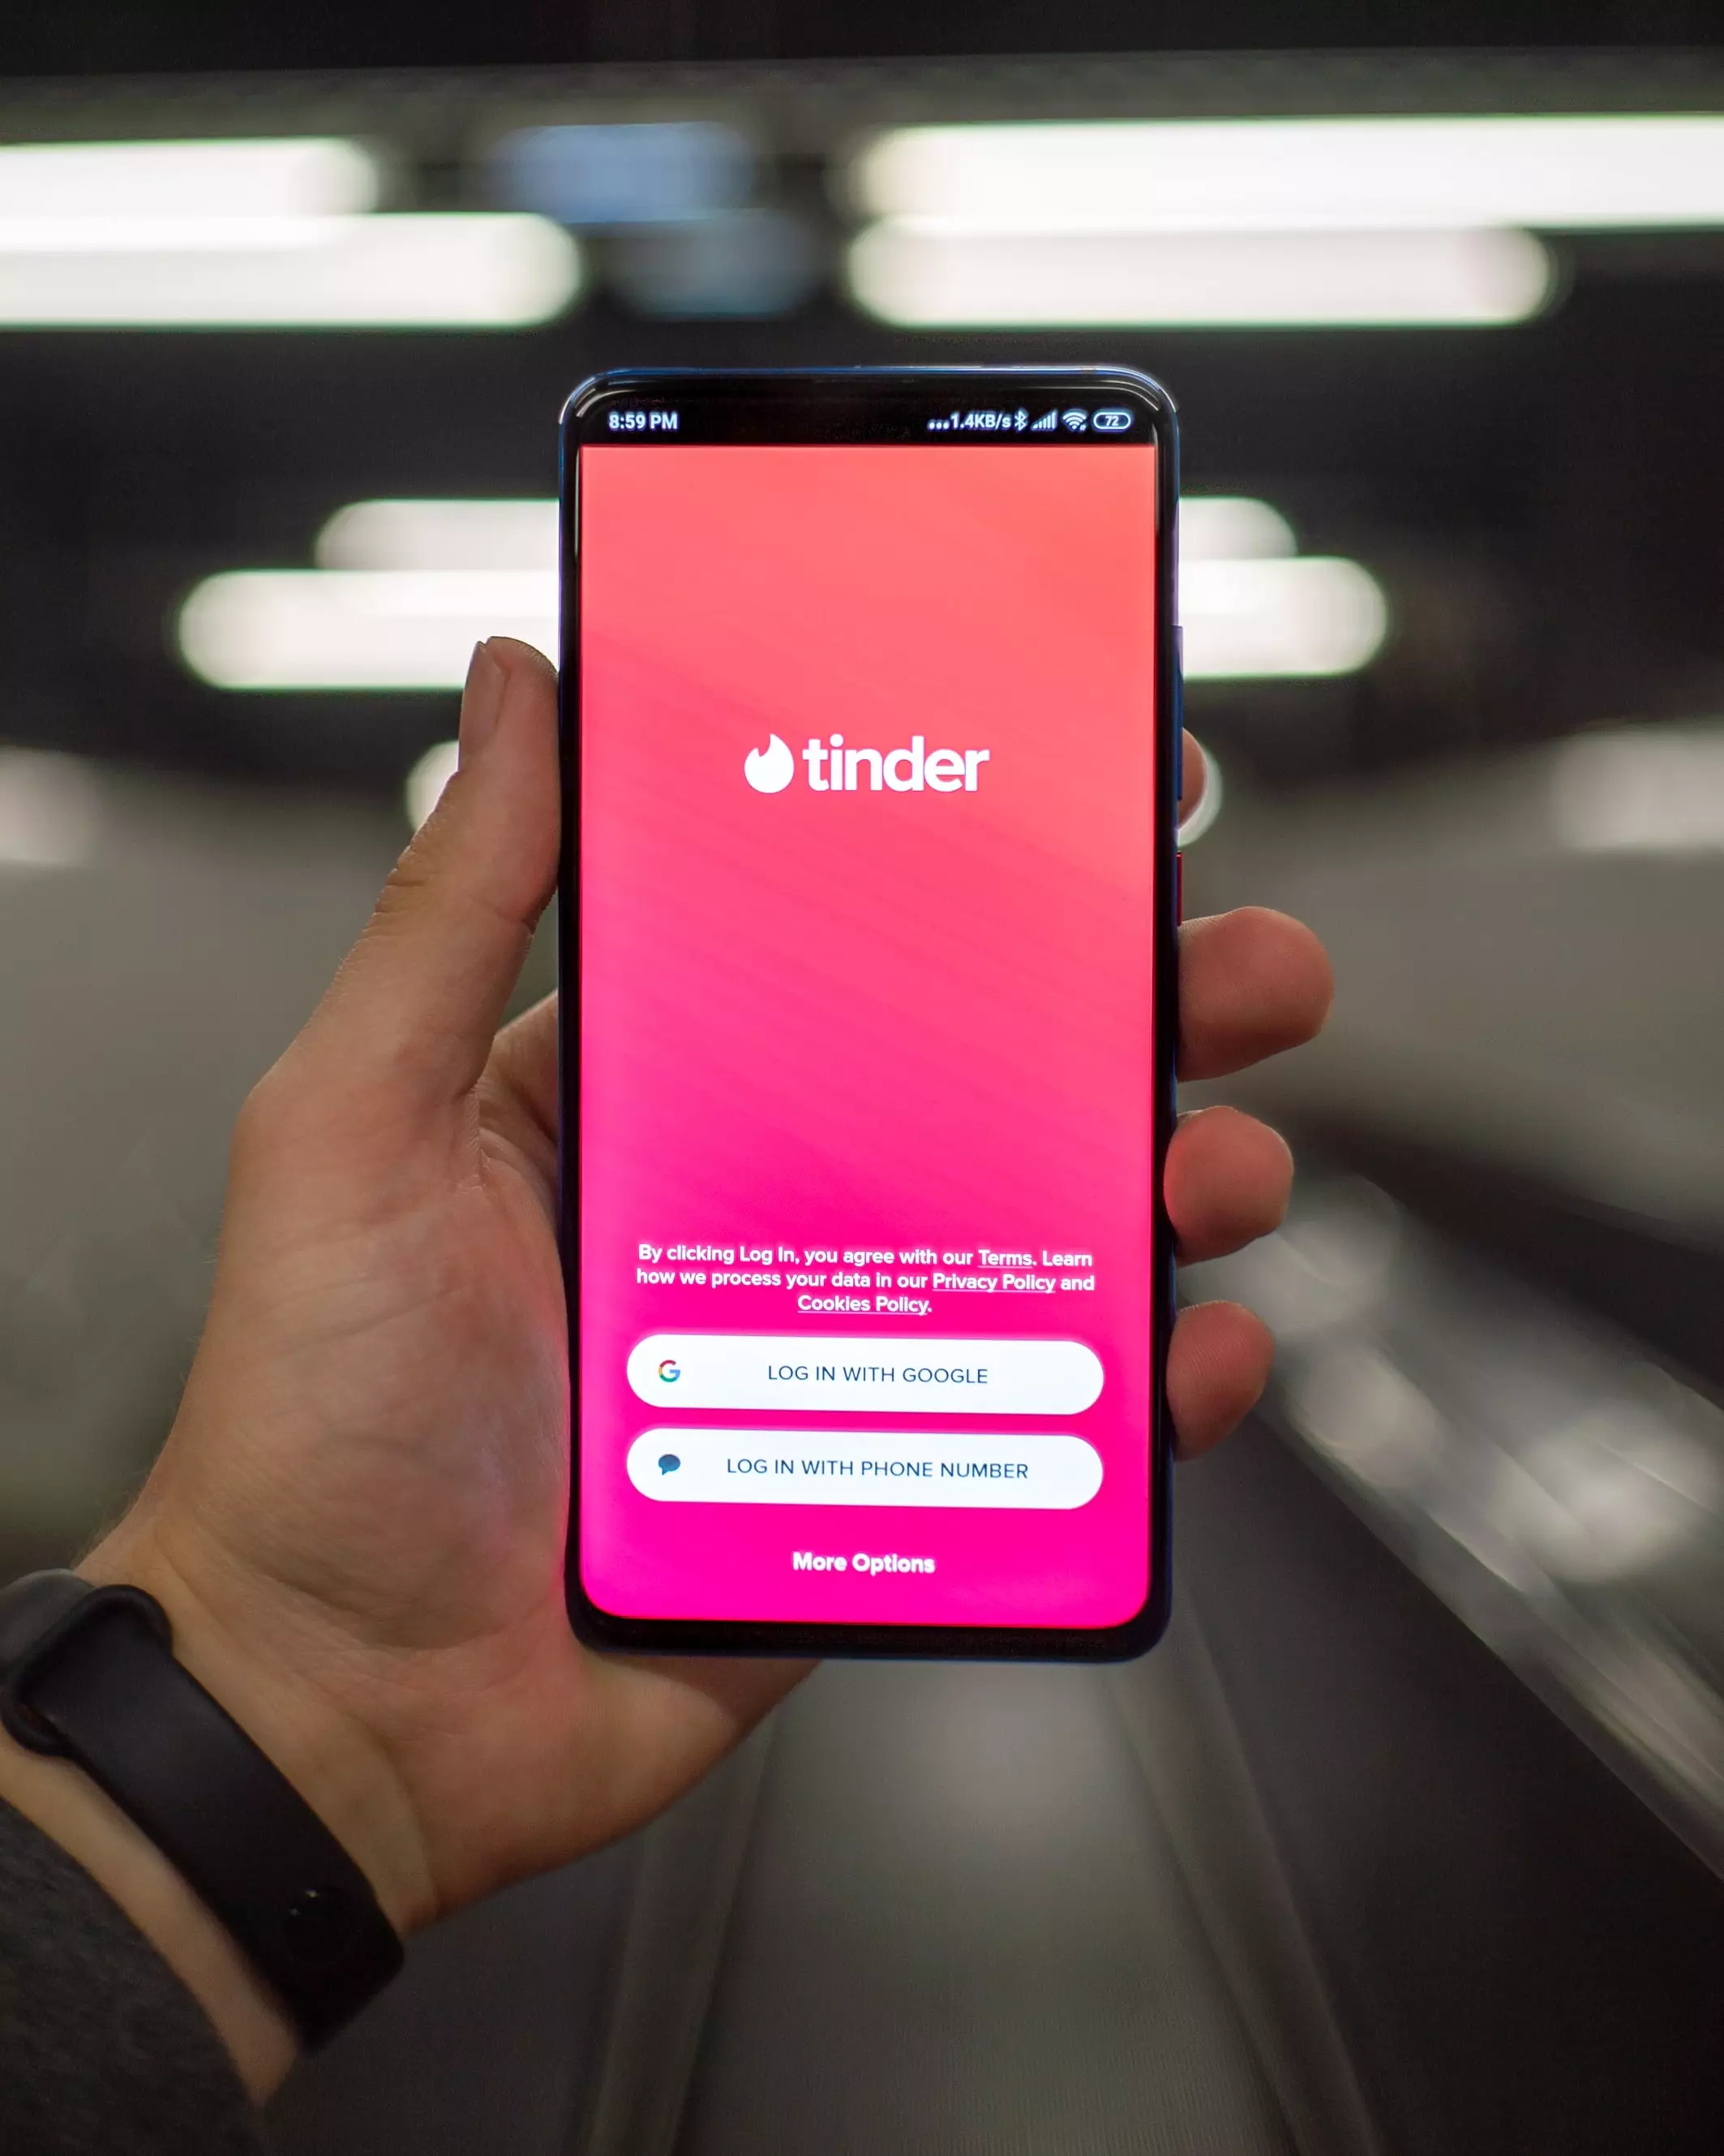 Tinder dating app had record year during pandemic (